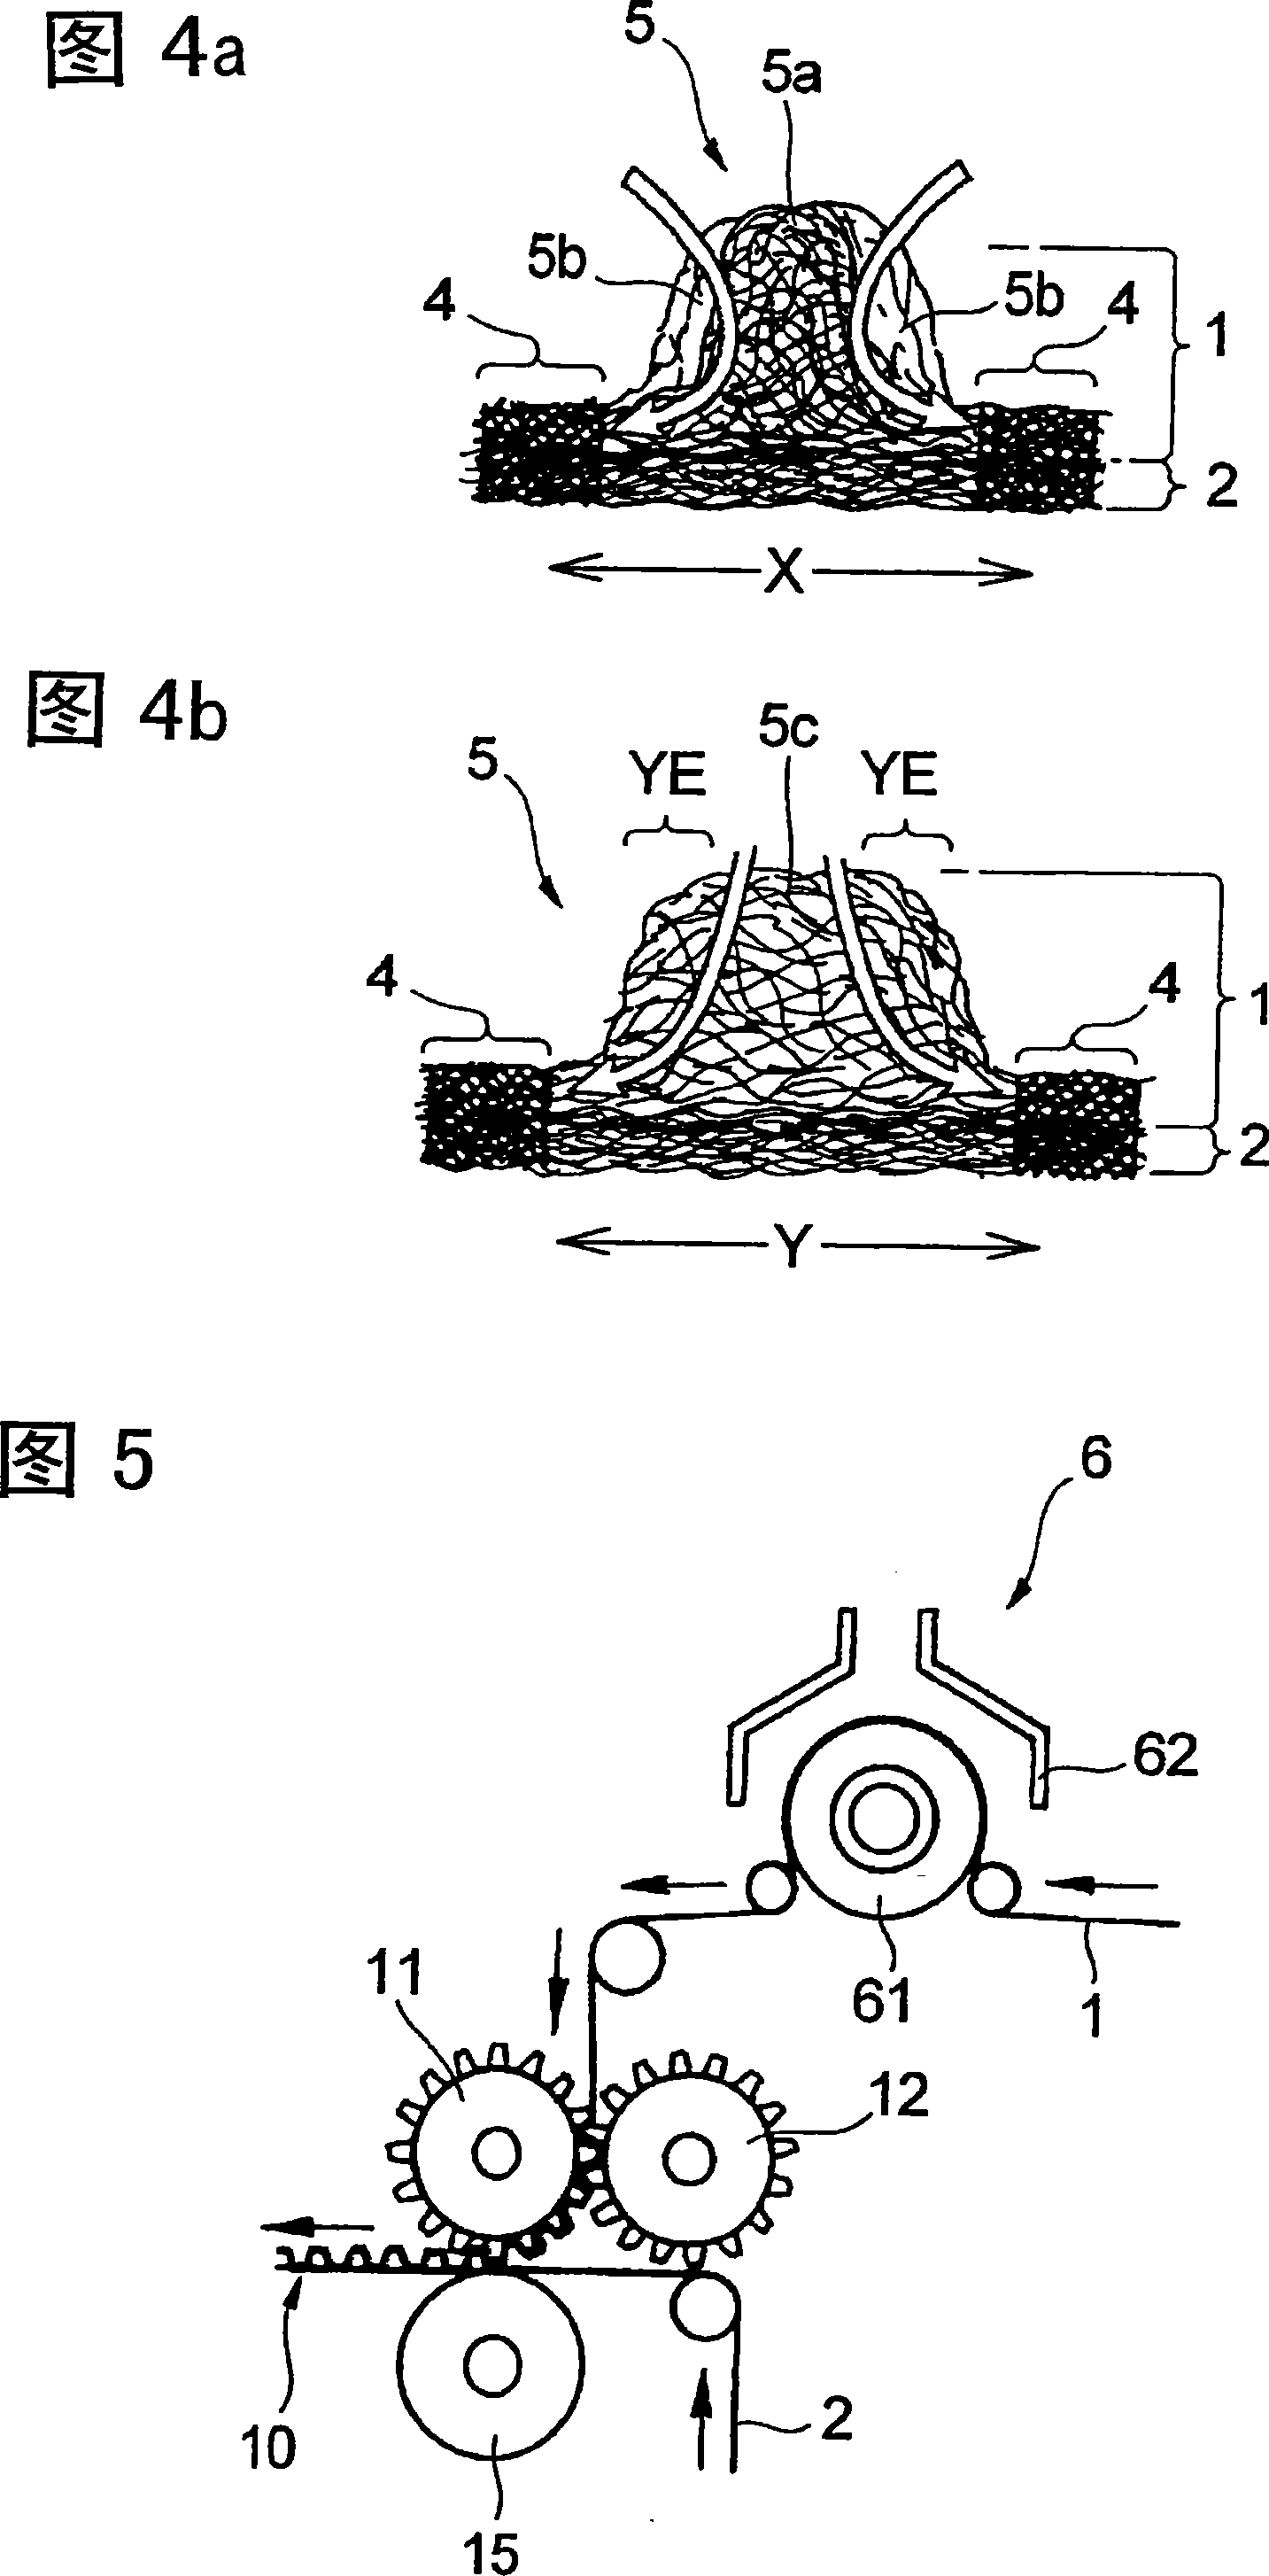 Face sheet for absorption article and method for producing the same